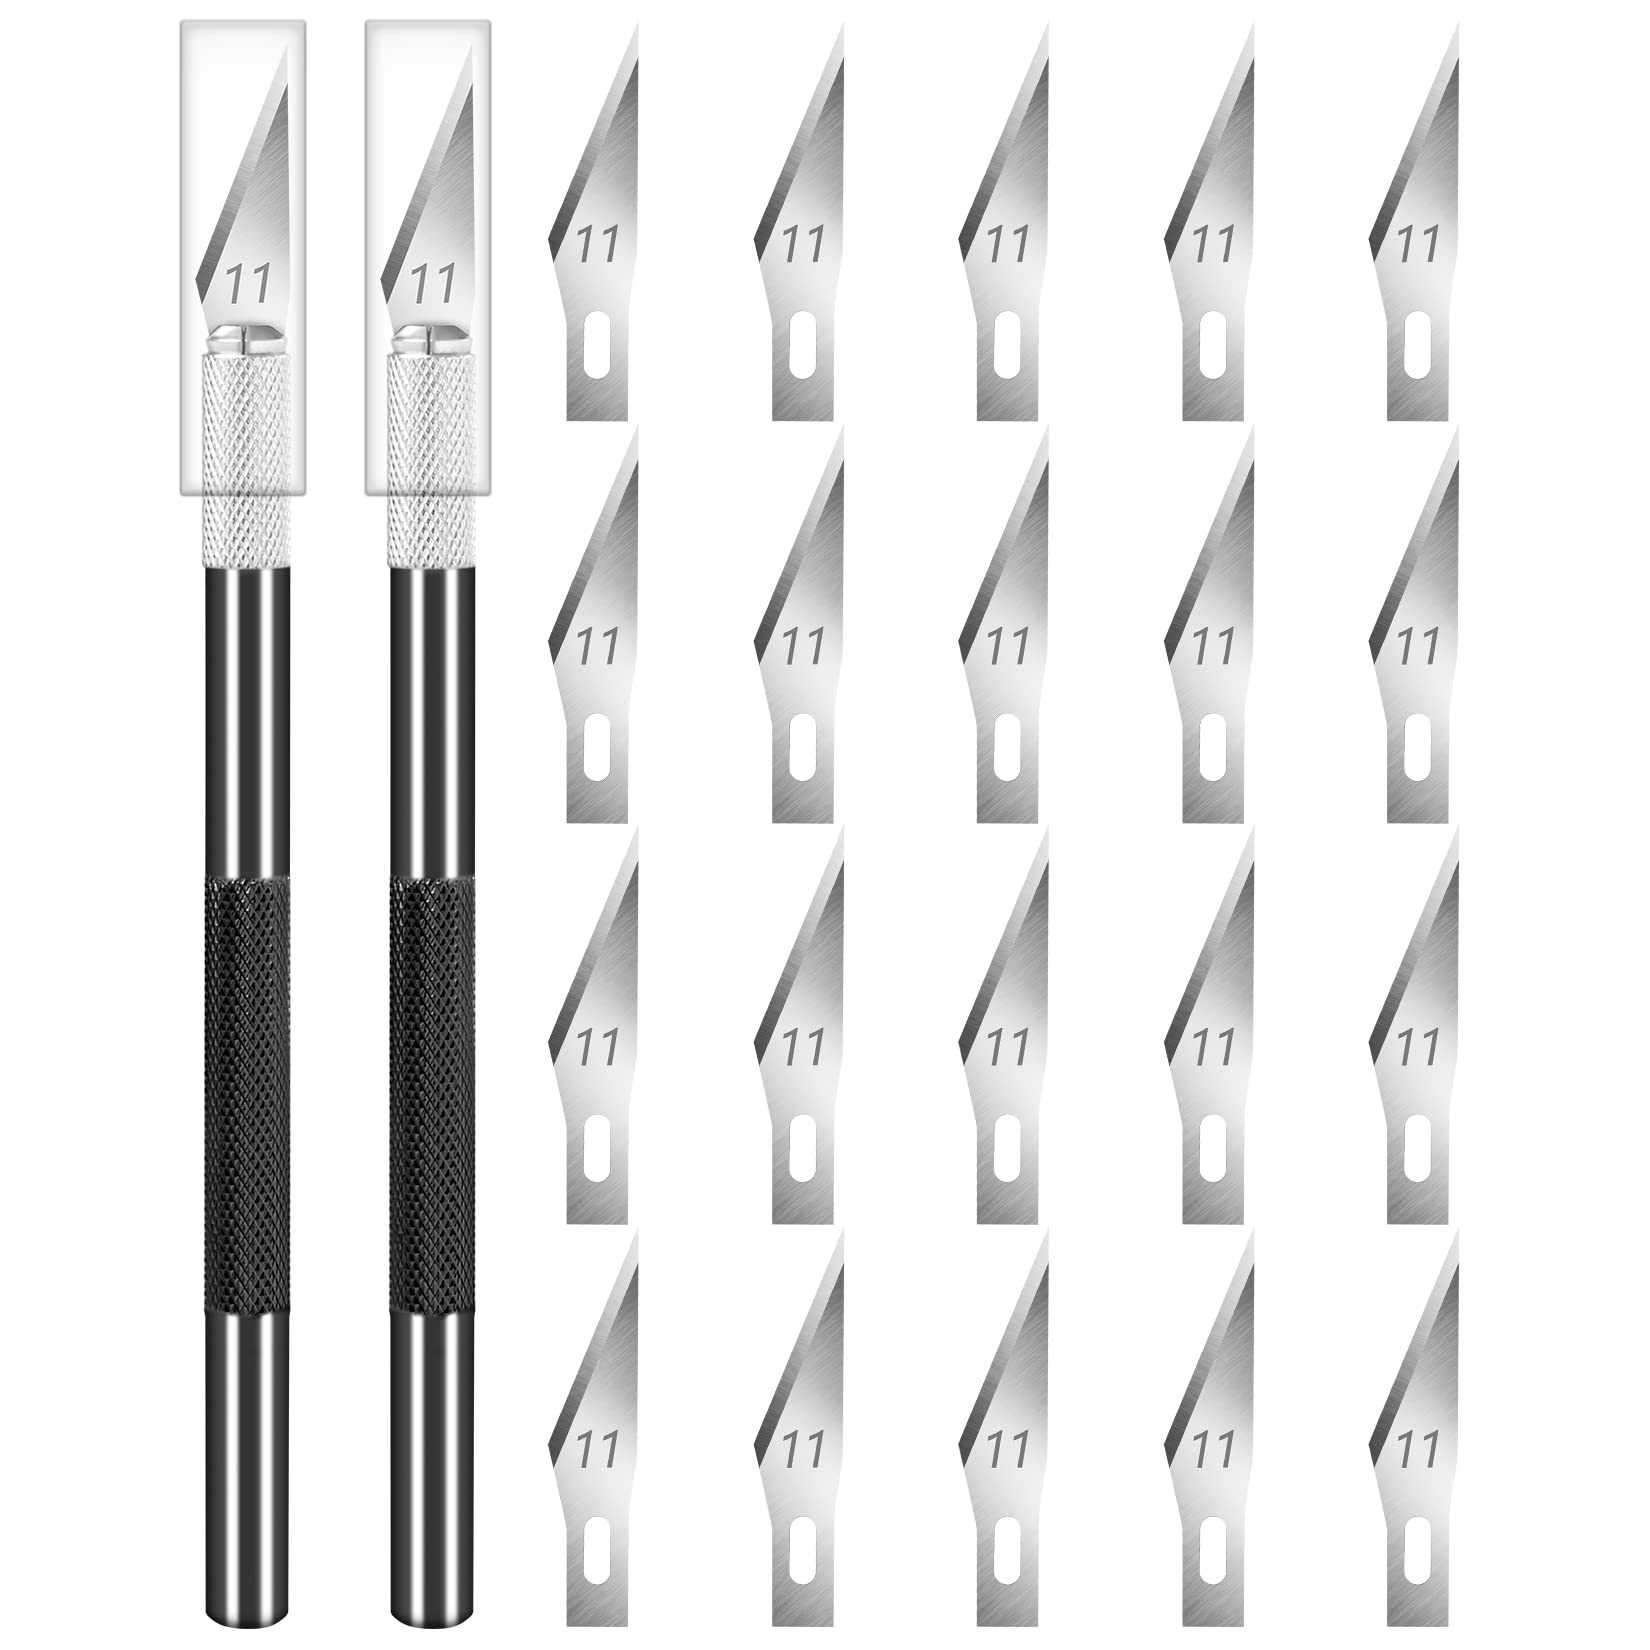 DIYSELF 2 Pack Exacto Knife for Crafting, Art, Hobby Knife for Fondant, Craft Knife Exacto, Precision Knife for Crafts, Leather, Art Knife Set, Exacting Knife Set with Extra 20 Blades #11(Black)